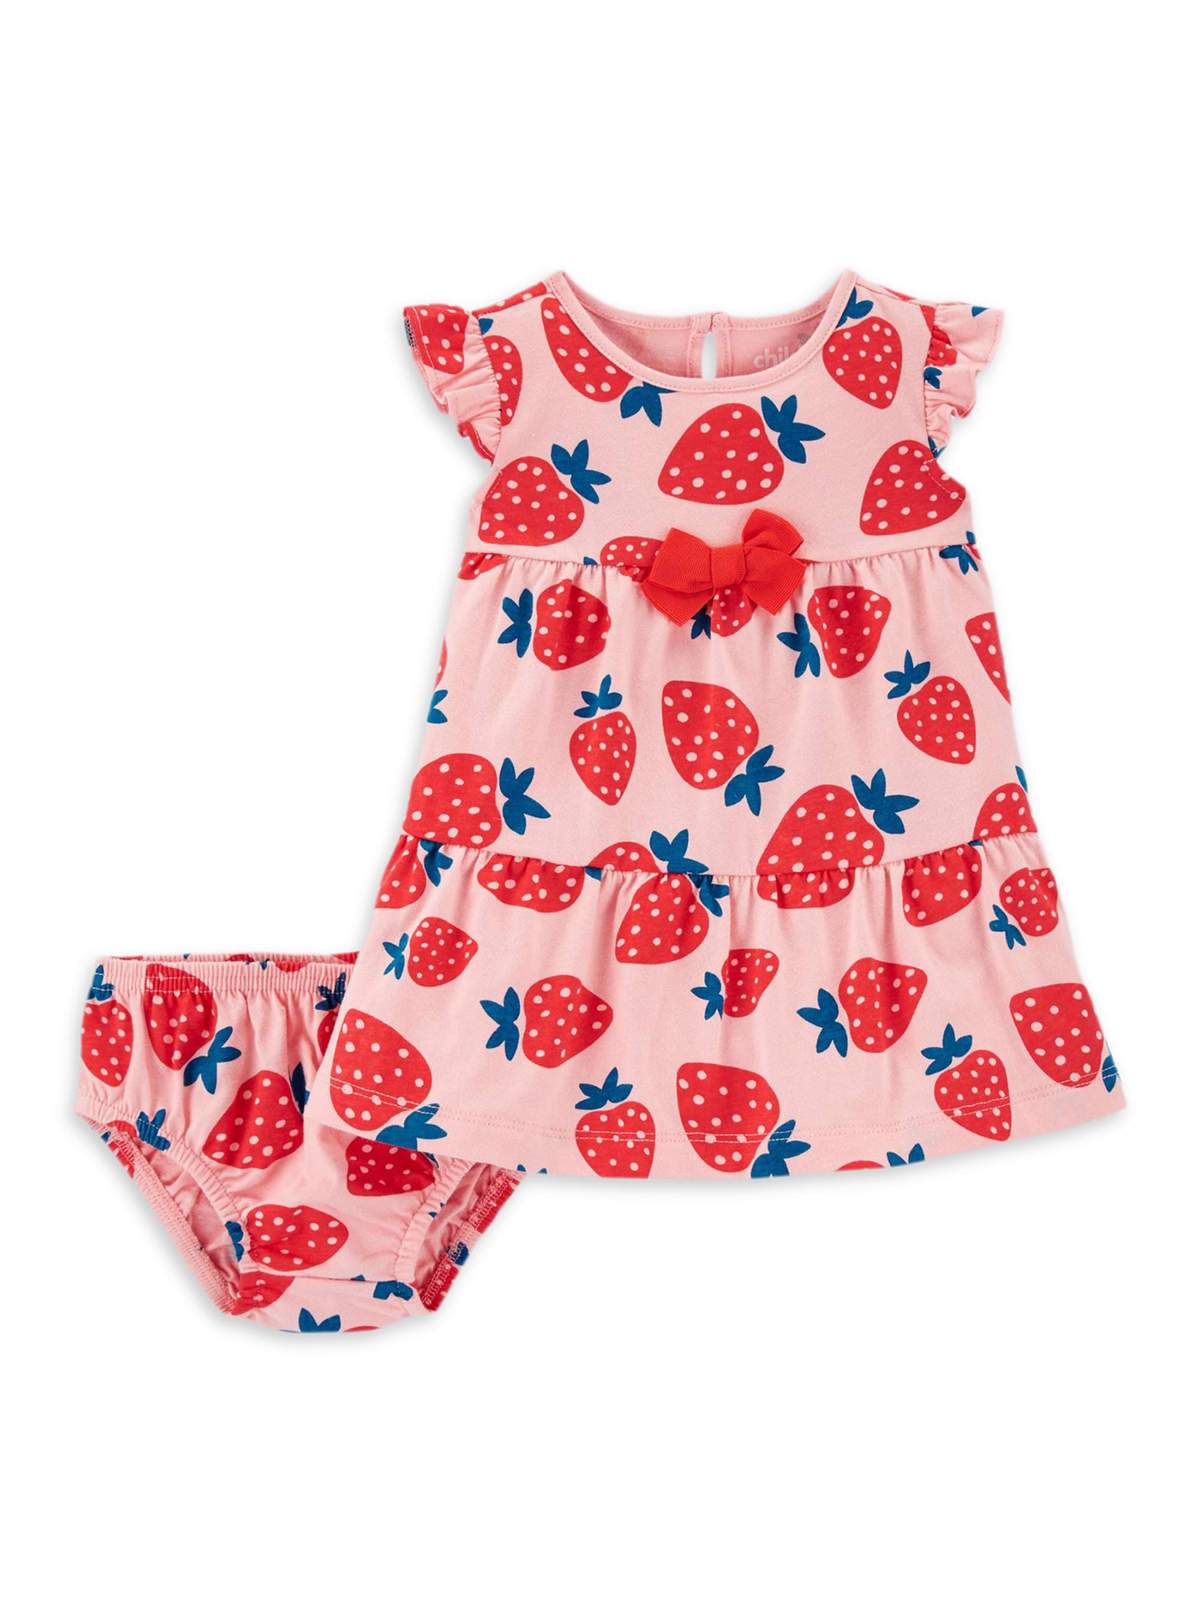 Primary image for Child of Mine by Carter's Baby Girl Strawberry Bodysuit Dress